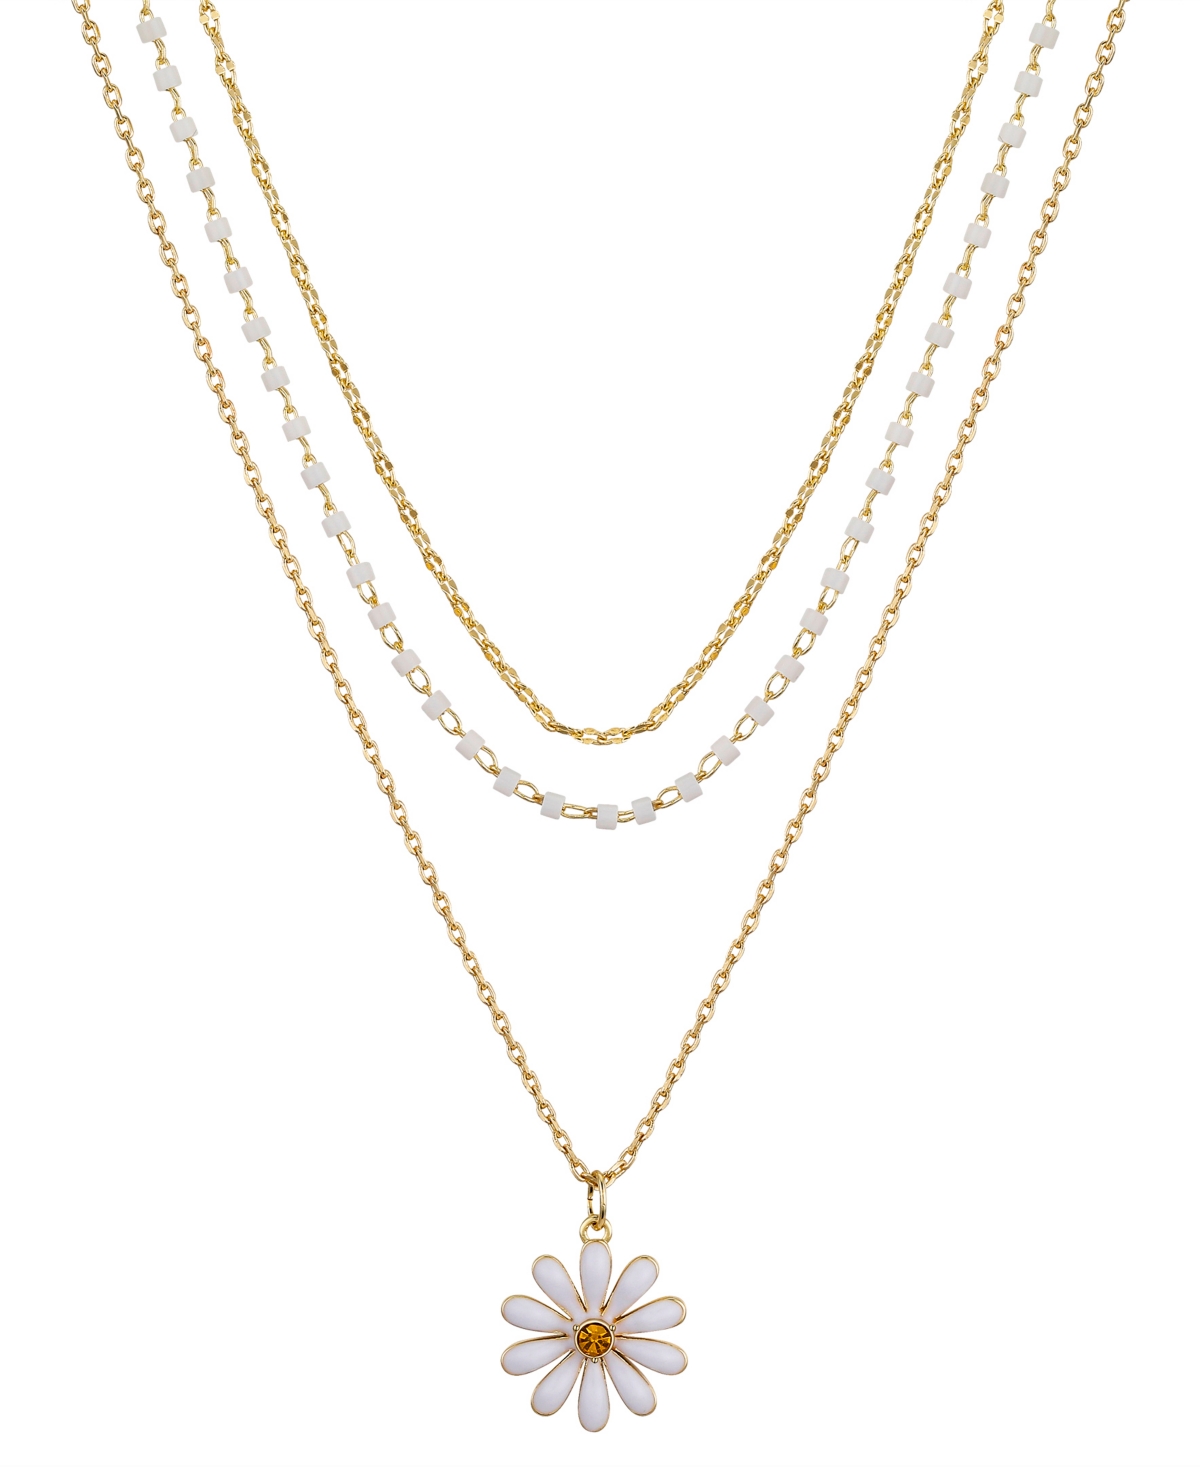 Unwritten White Beaded And Enamel Flower Layered 3-piece Necklace Set In Yellow